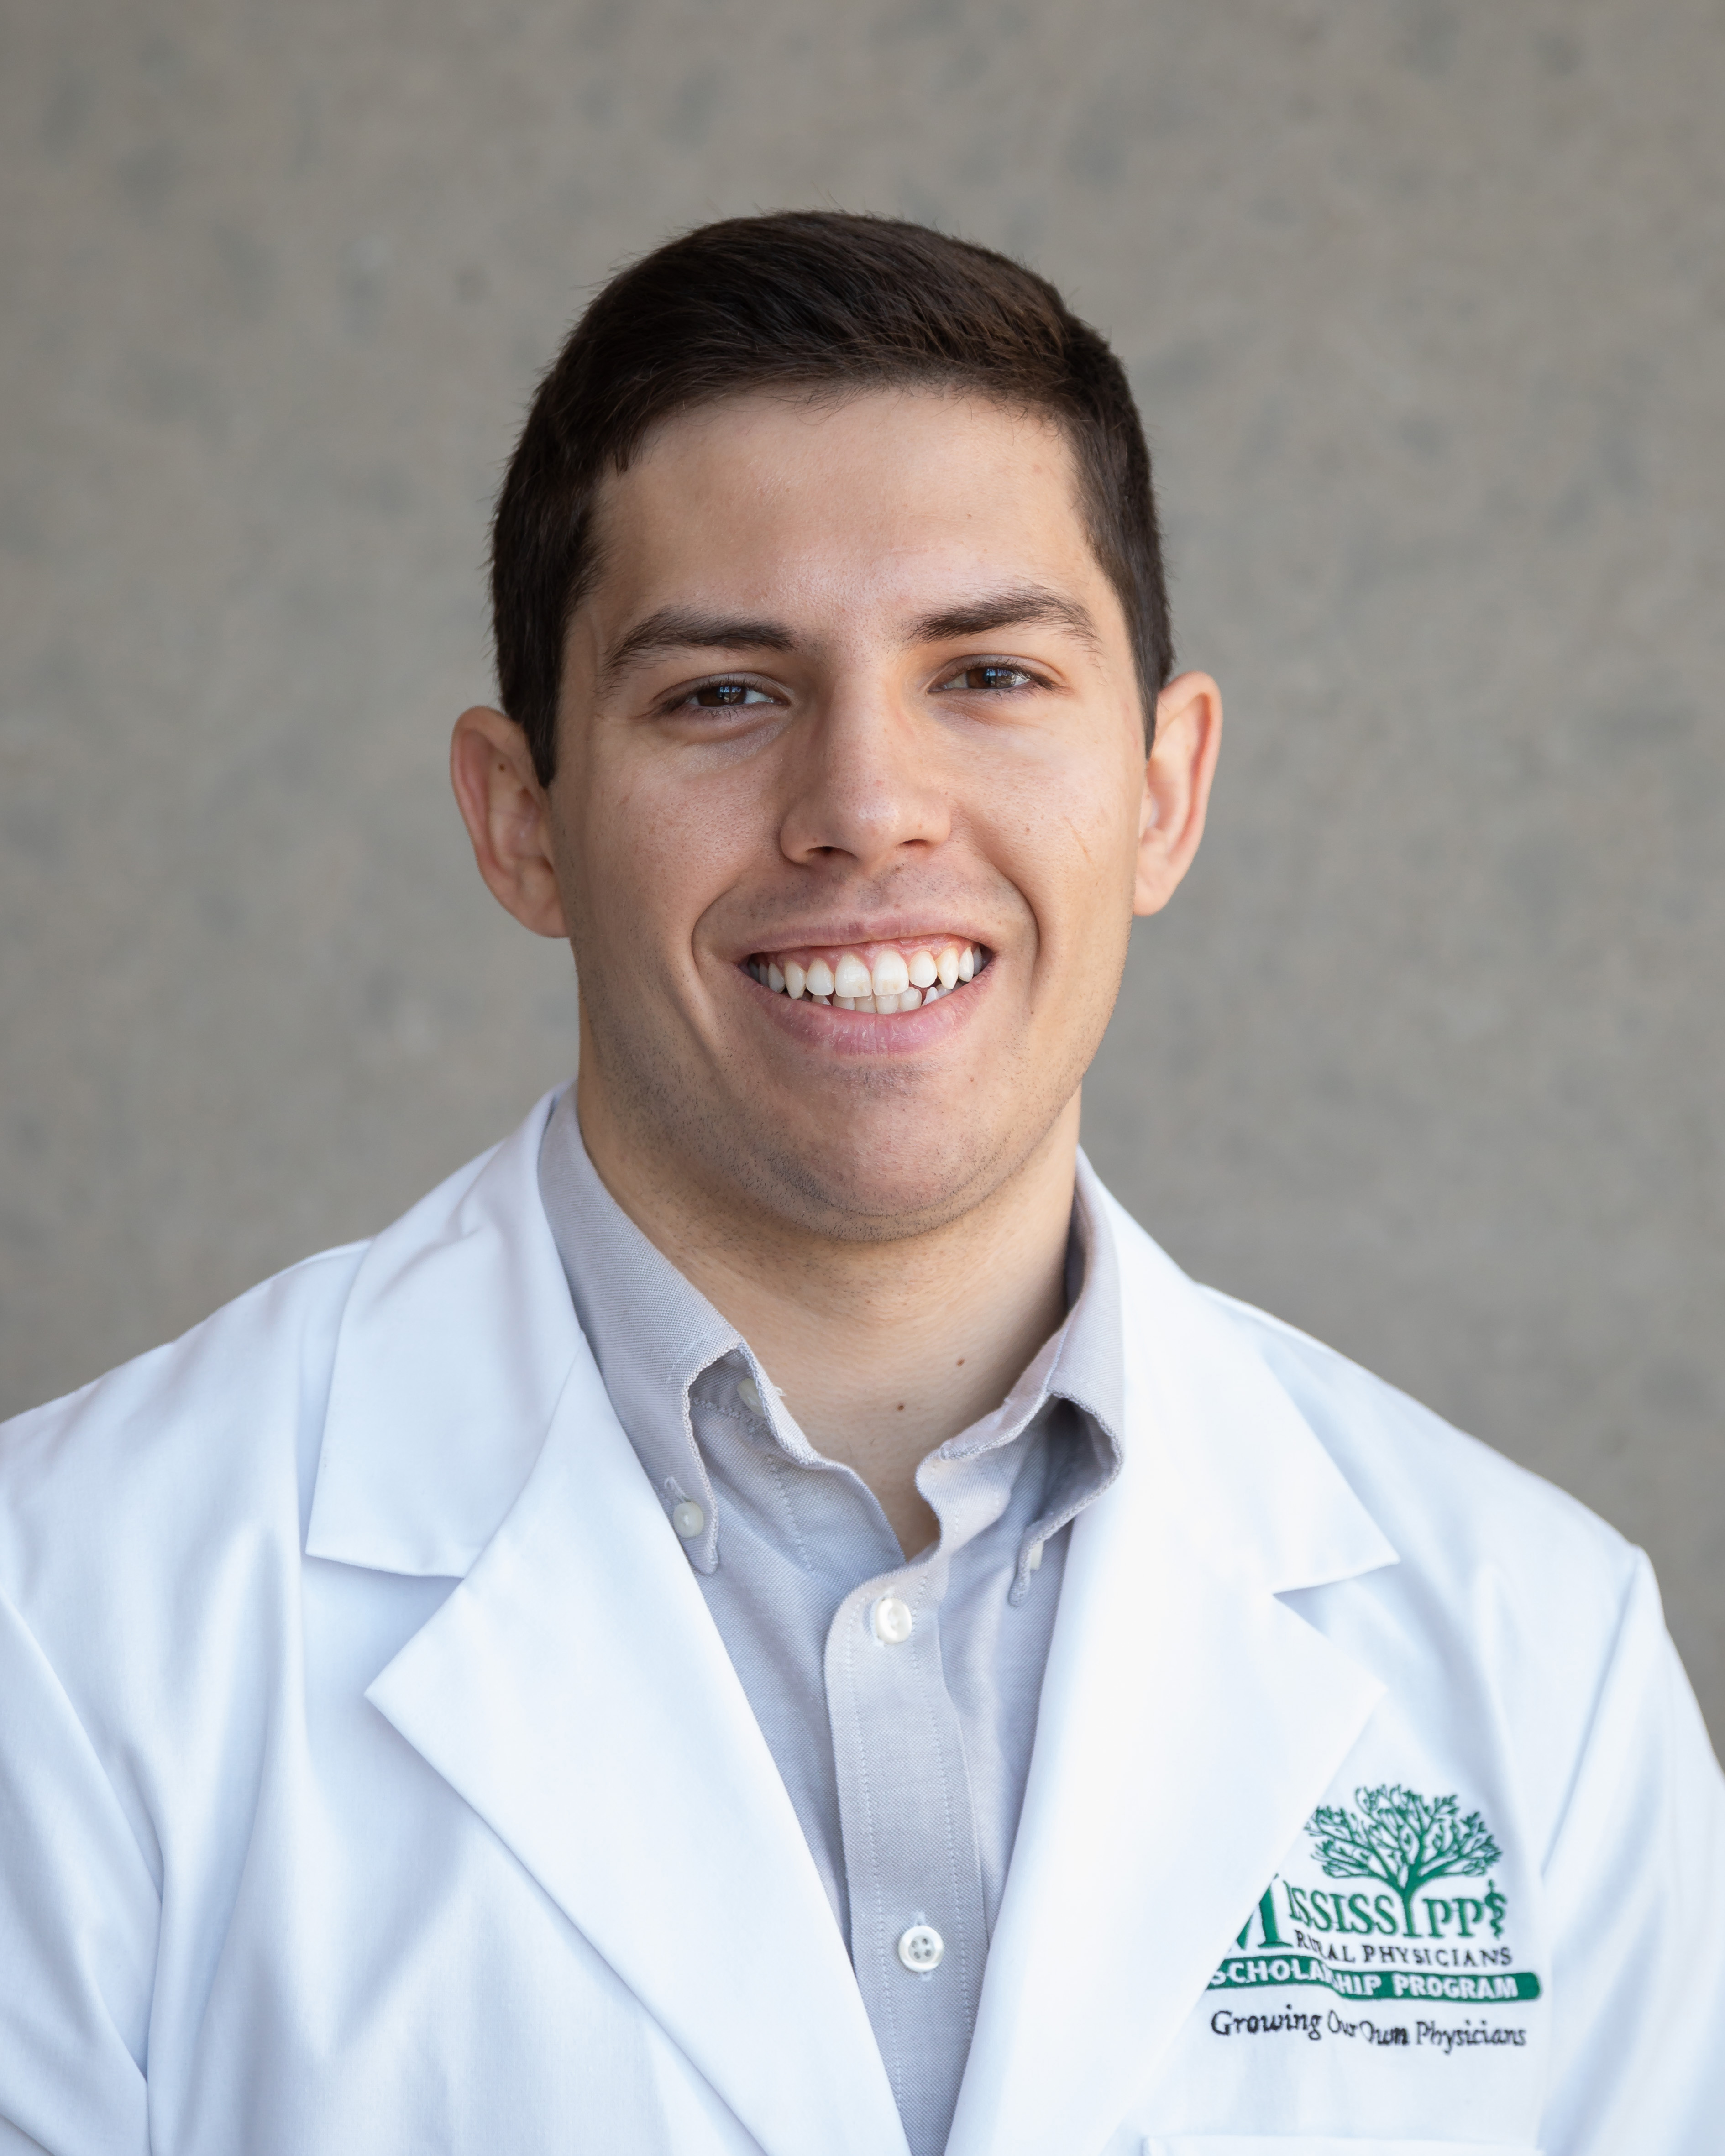 A portrait of Emilio Suarez wearing his white coat received for the Mississippi Rural Physicians Scholarship Program